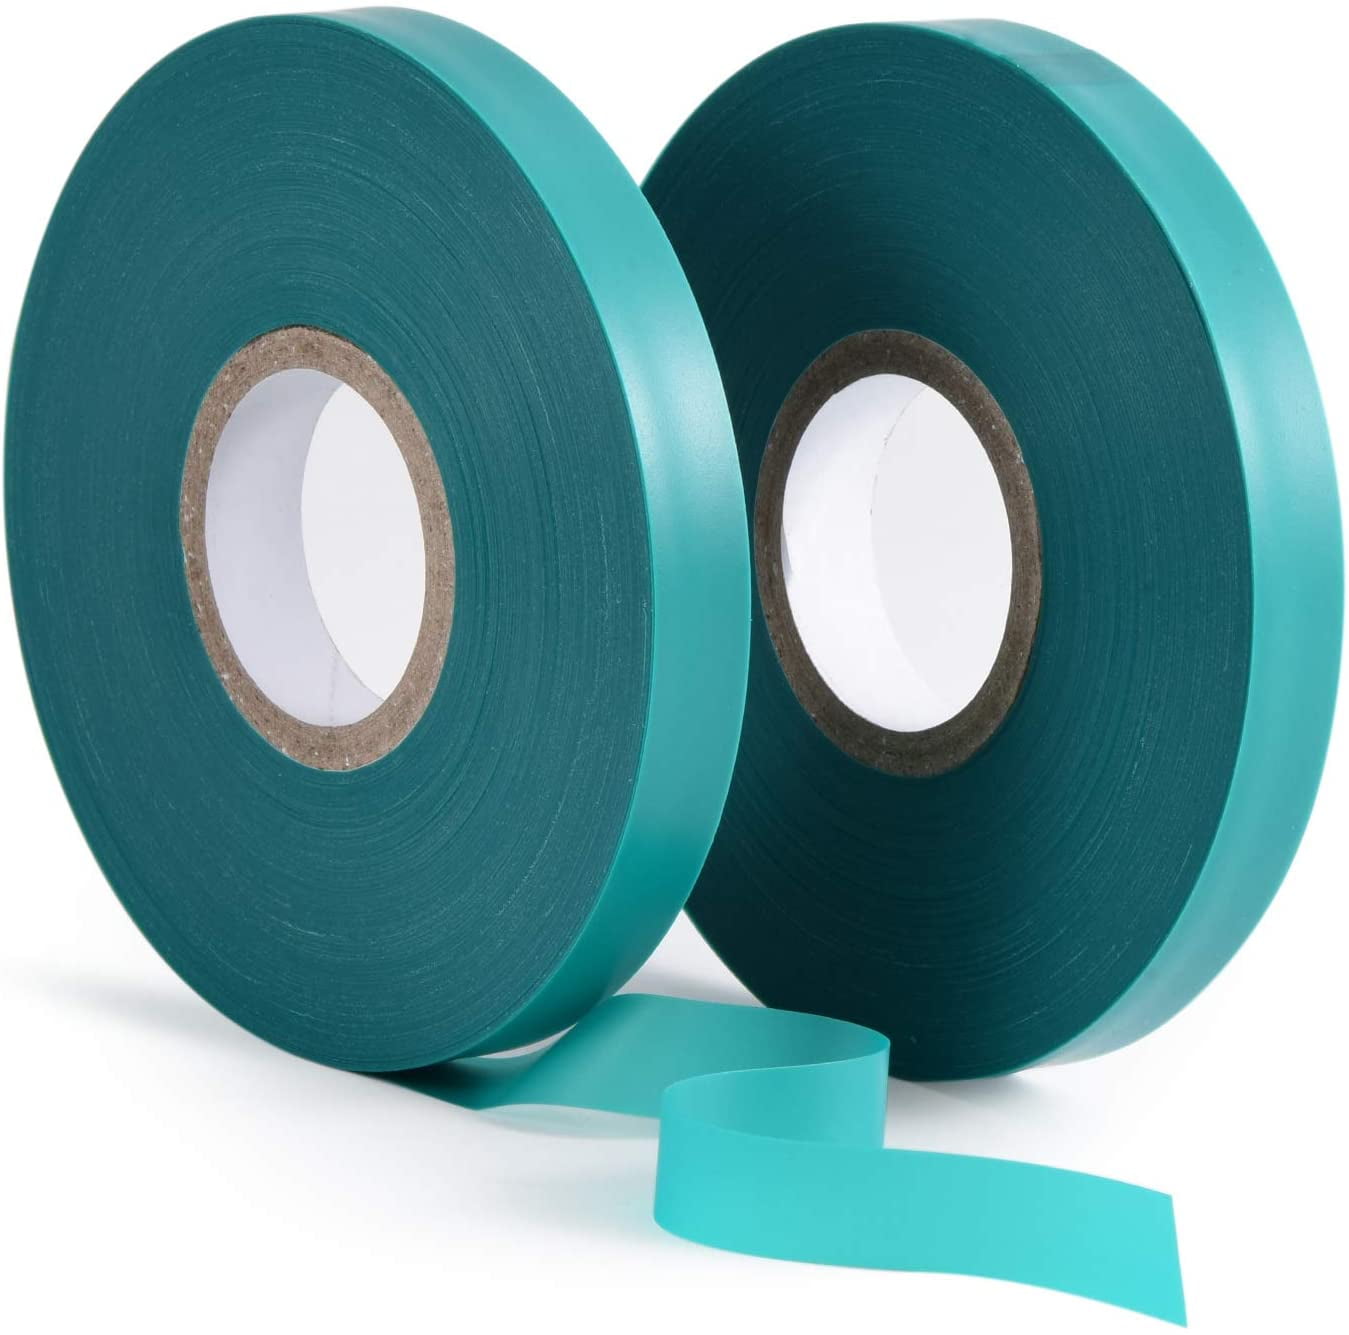 Stretch Tie Tape Plant Ribbon Garden Green Vinyl Stake Garden Tie Tape Thick Sturdy Plant Gardening Tools Moonvvin Stretch Tie Tape Roll